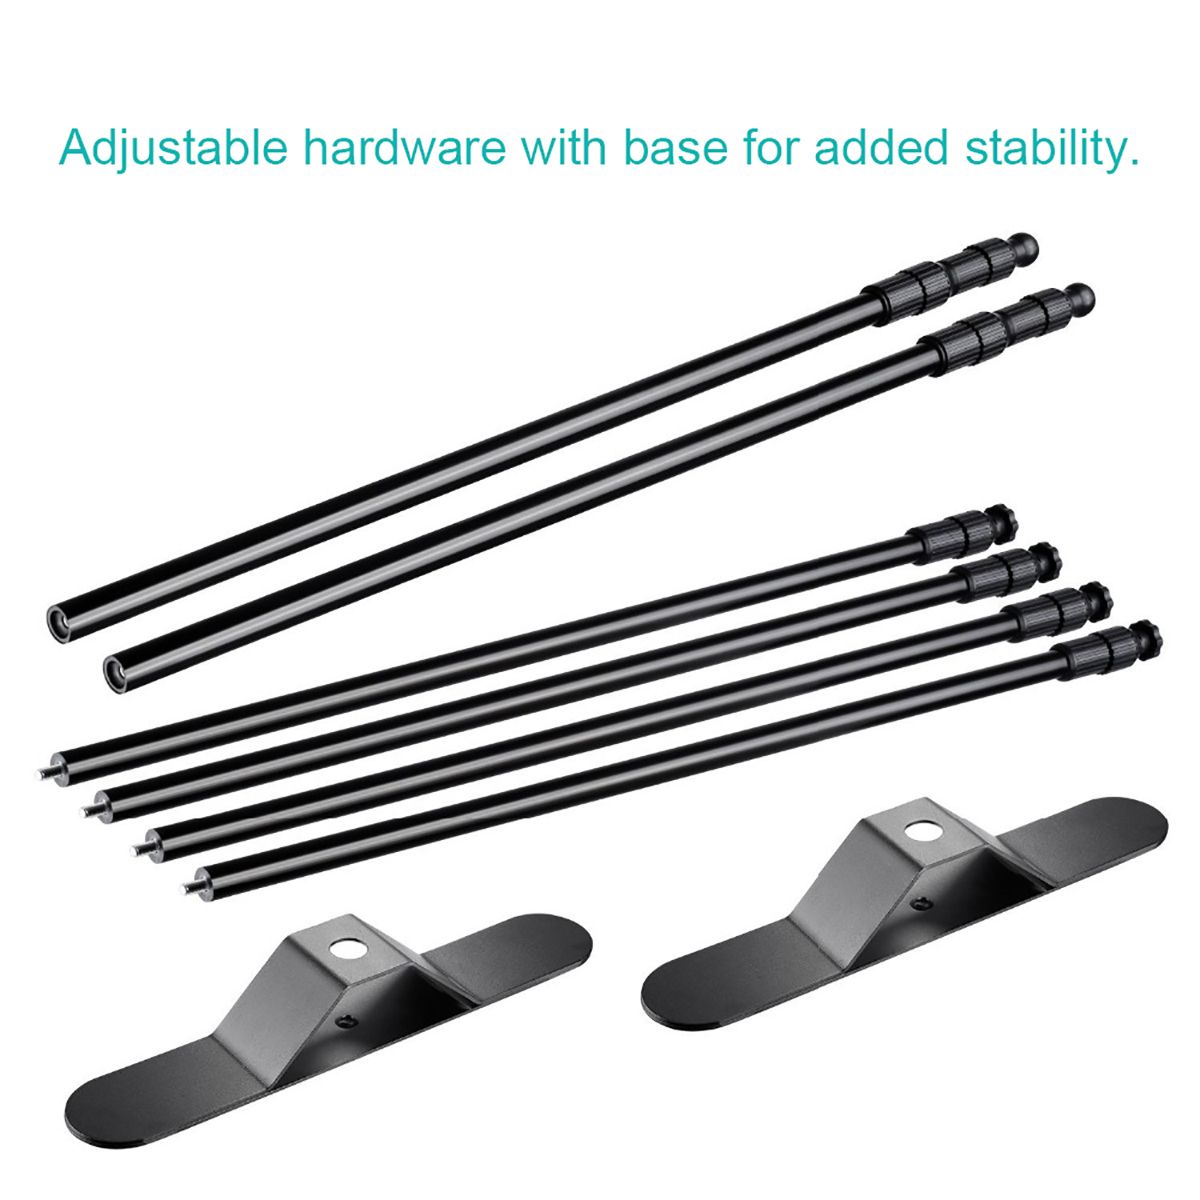 79FT-115FT-Iron-Adjustable-Telescopic-Photography-Background-Stand-Kit-with-Carrying-Bag-for-Backdro-1673294